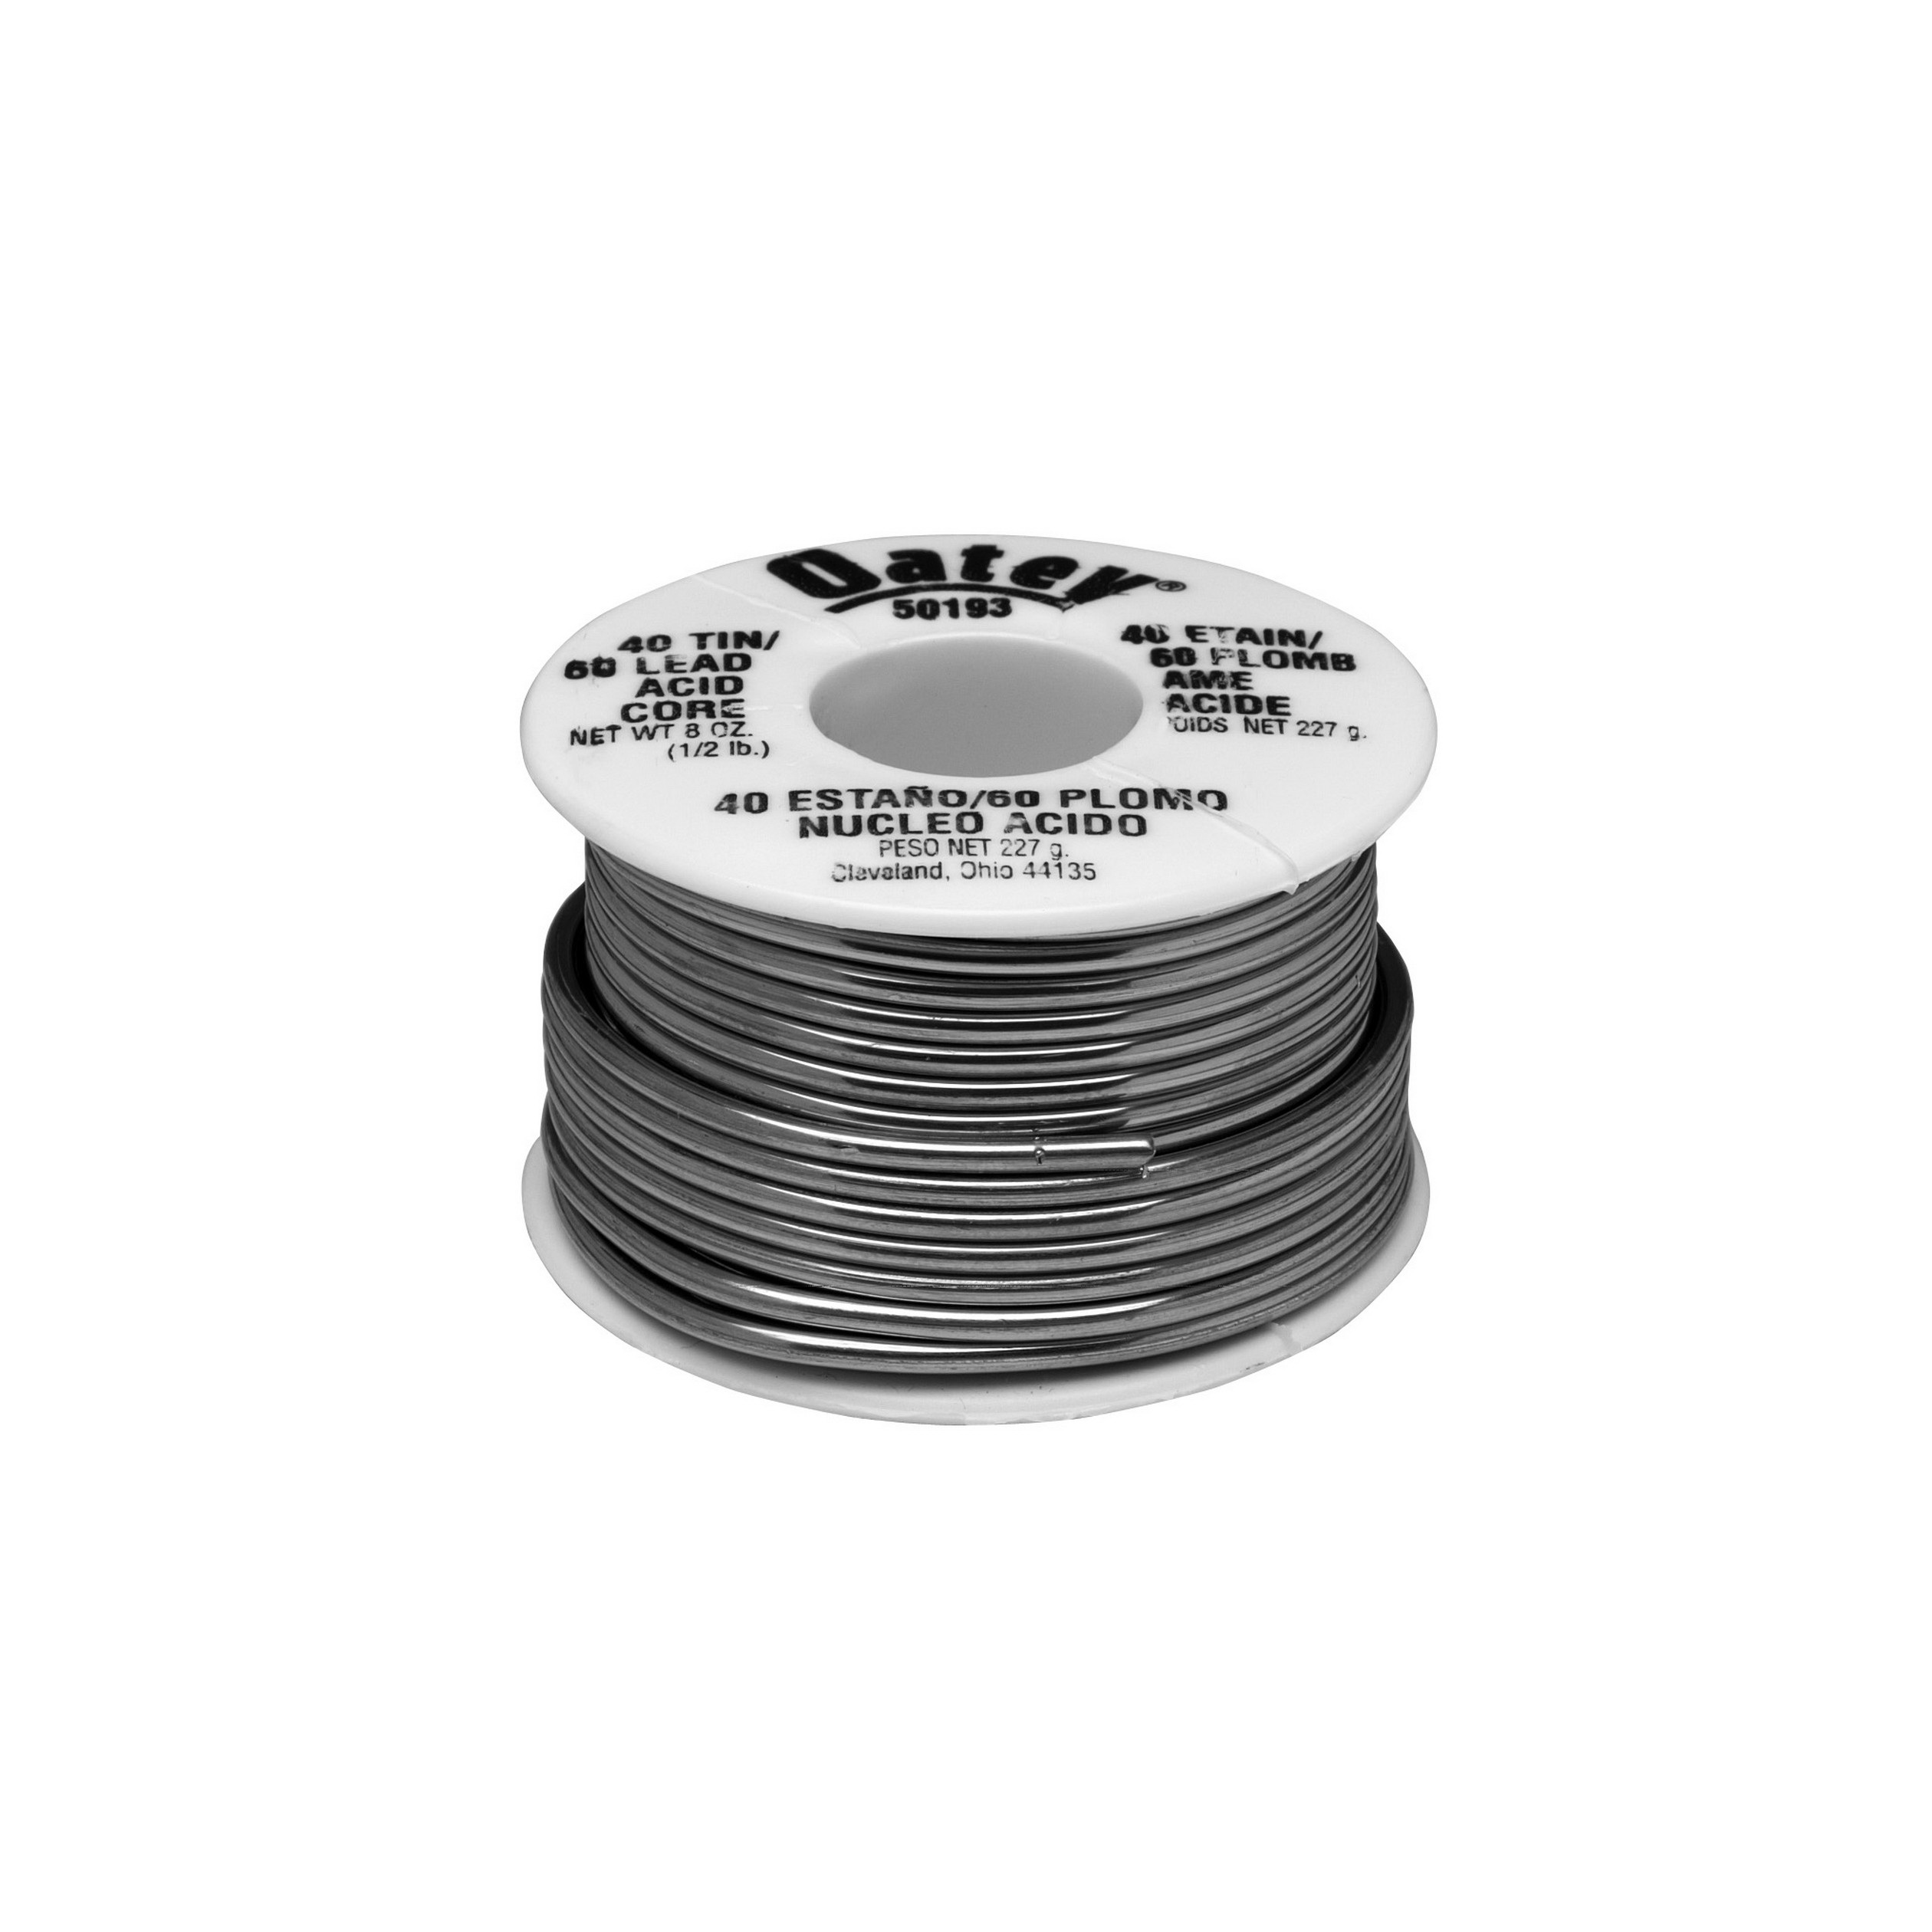 Oatey 50193 Acid Core Wire Solder, 1/2 lb, Solid, Silver, 360 to 460 deg F Melting Point - 4